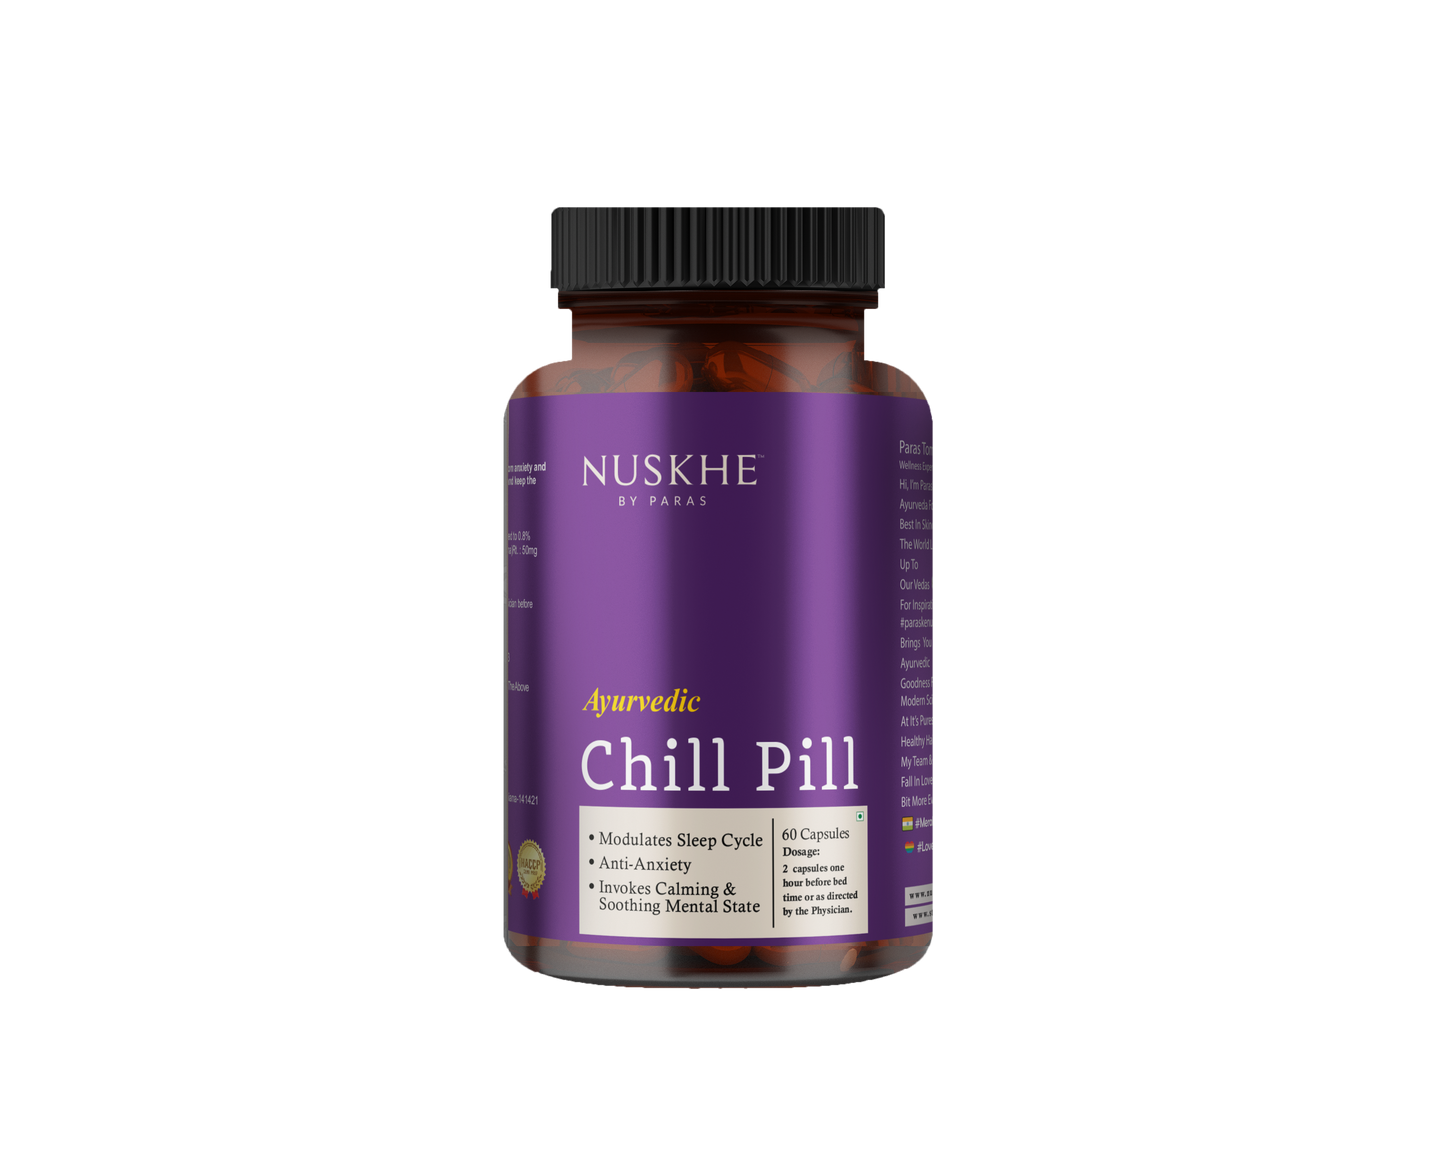 Nuskhe by Paras Ayurvedic Chill Pill for sleep and managing anxiety